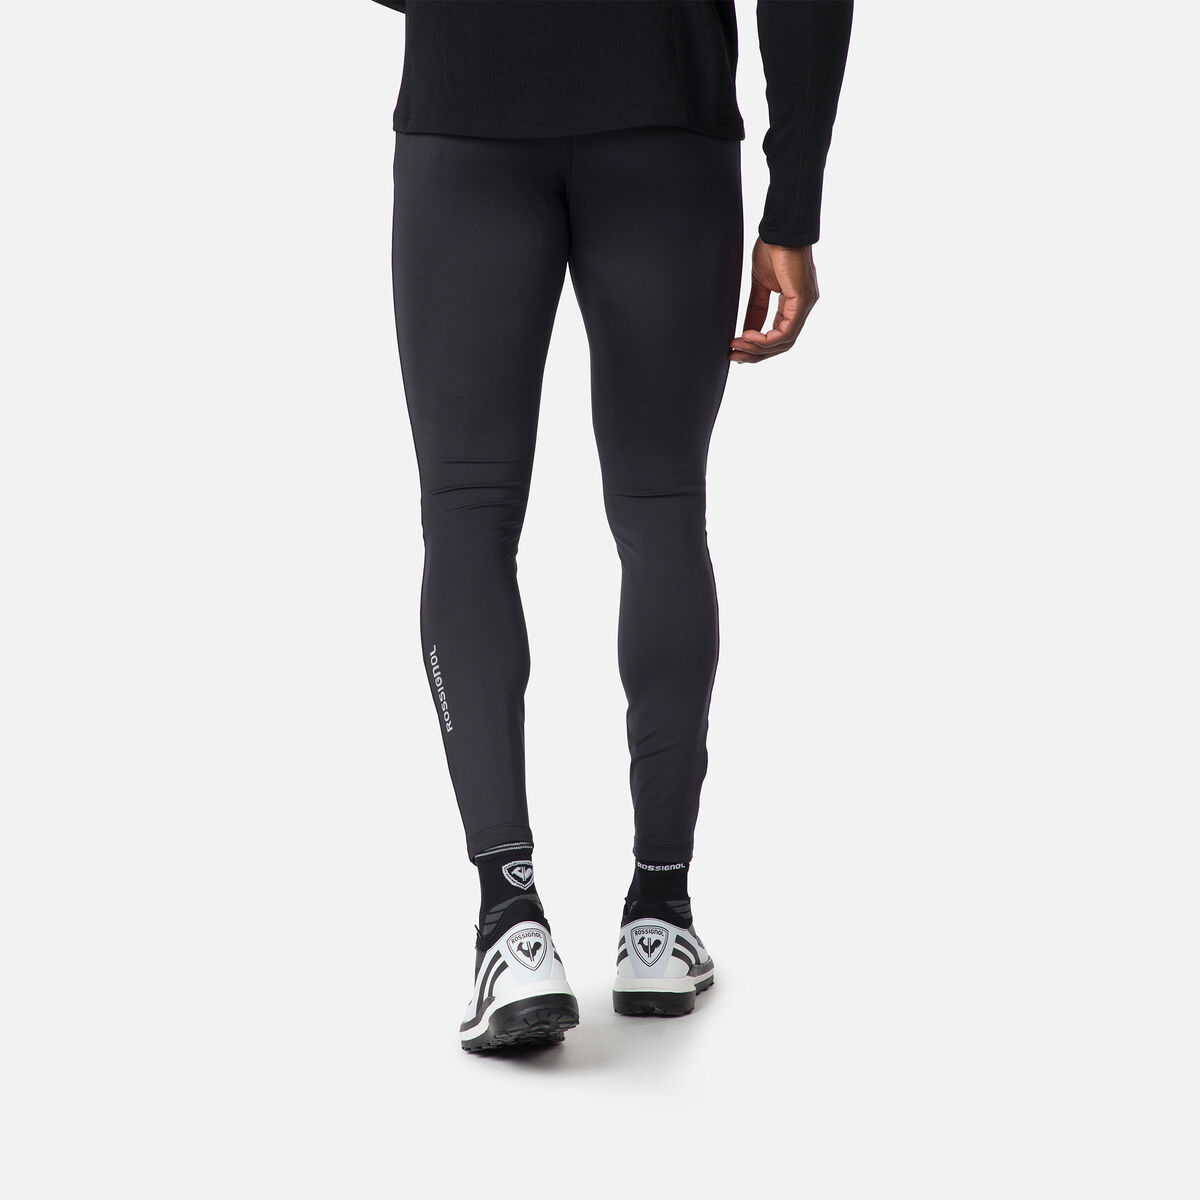 2023 Mens Sports Lycra Tights With Pocket For Crossfit, Running, And  Fitness Compression Yoga Pants For Men And Leggings For Gym And Home  Workouts Style X0824 From Fashion_official01, $14.61